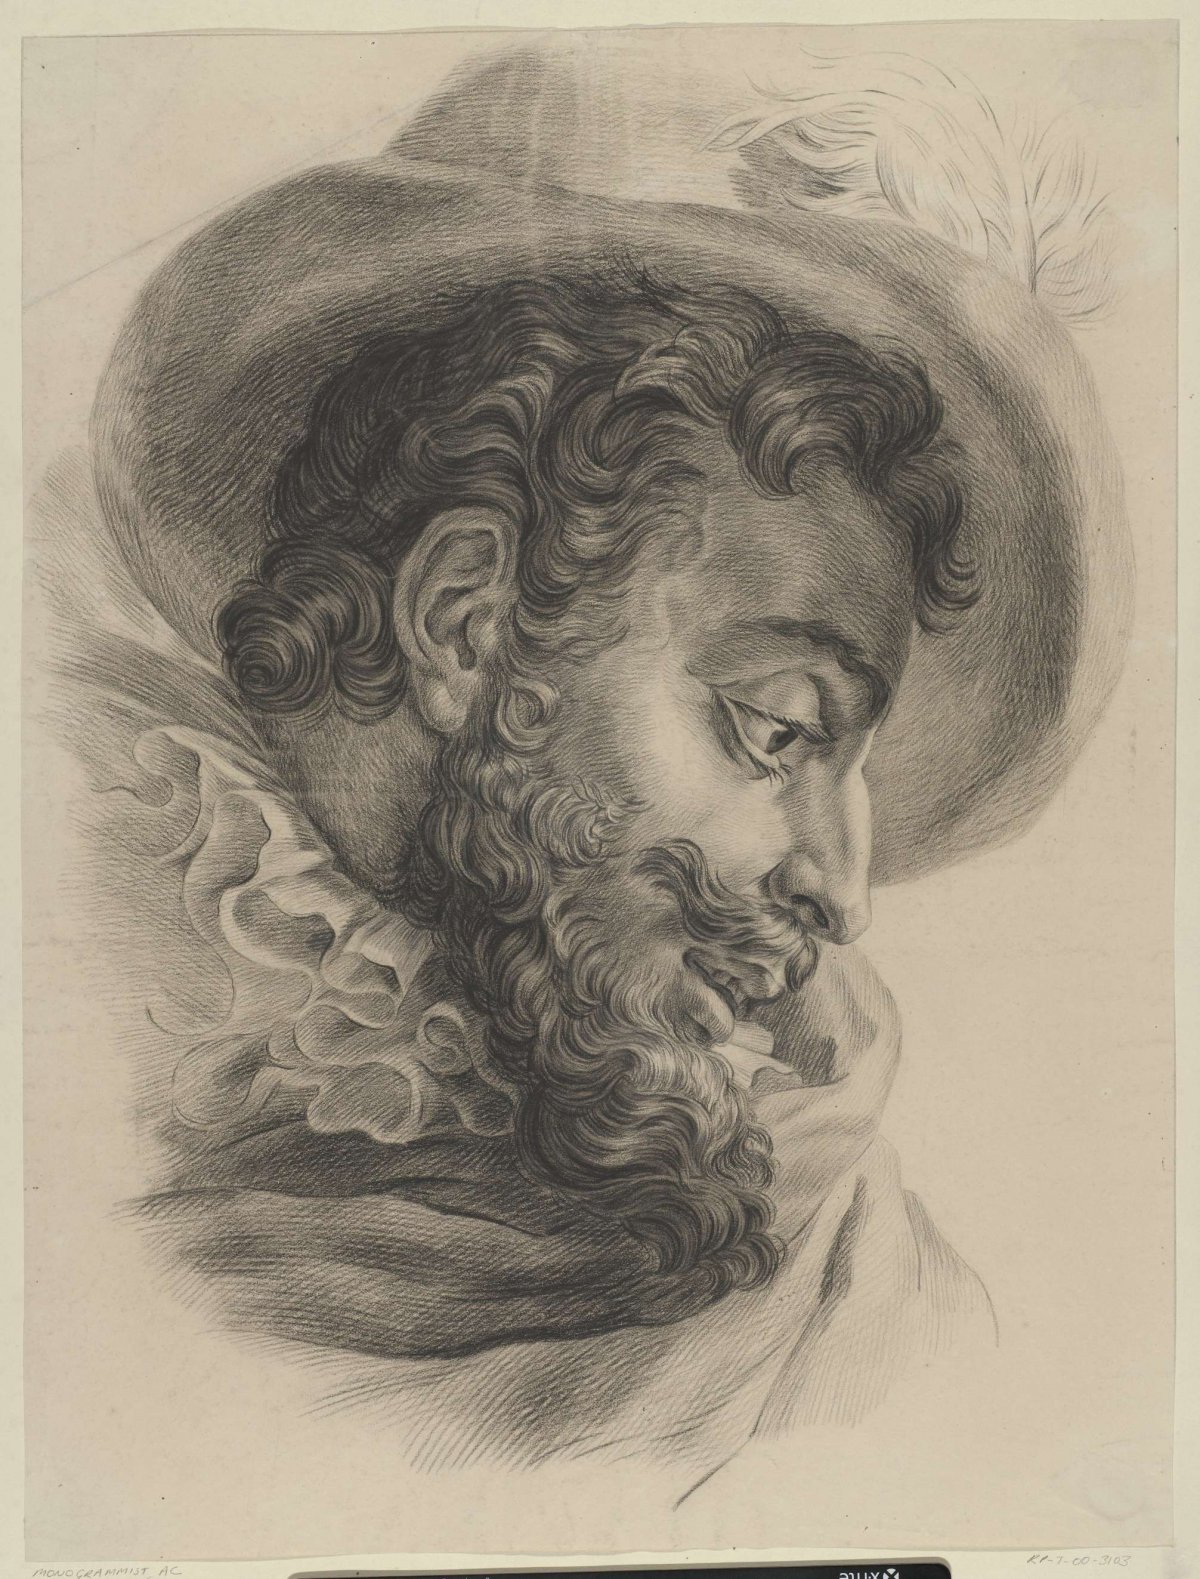 Head of a man with hat, looking down to the right, Monogrammist AC (19e eeuw), 1830